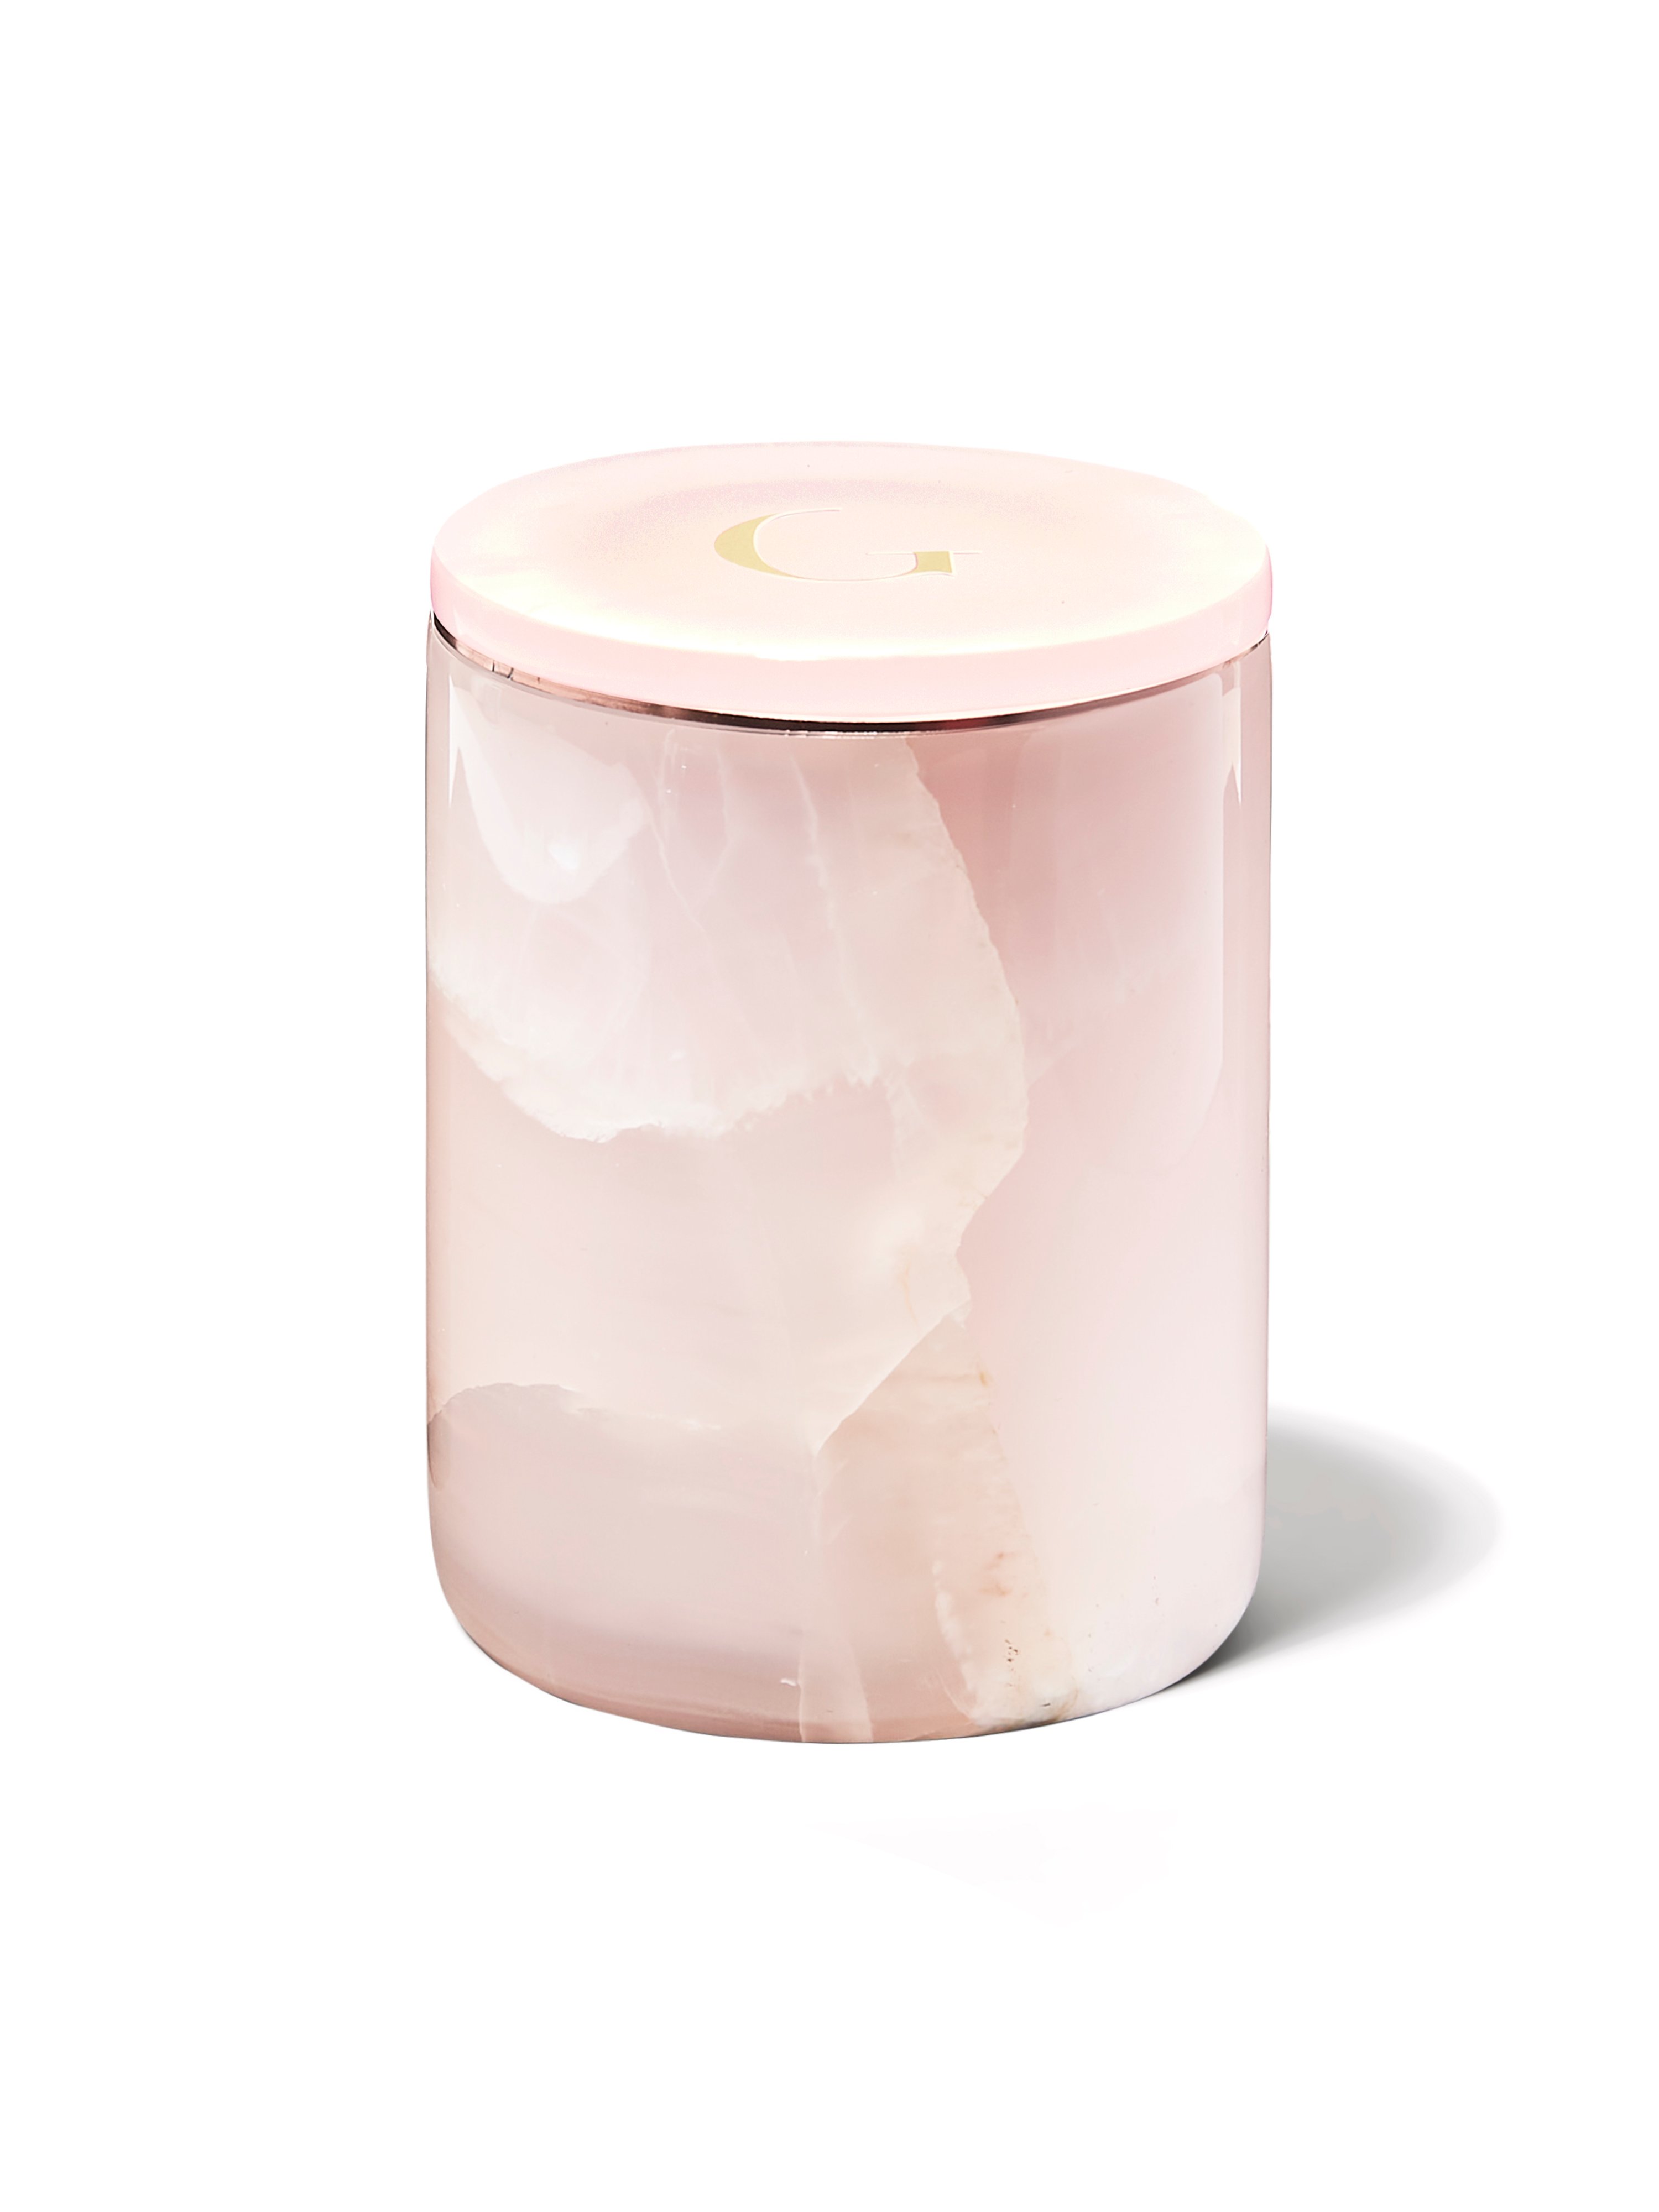 GILDED GILDED BODY PINK ONYX MARBLE CANDLE